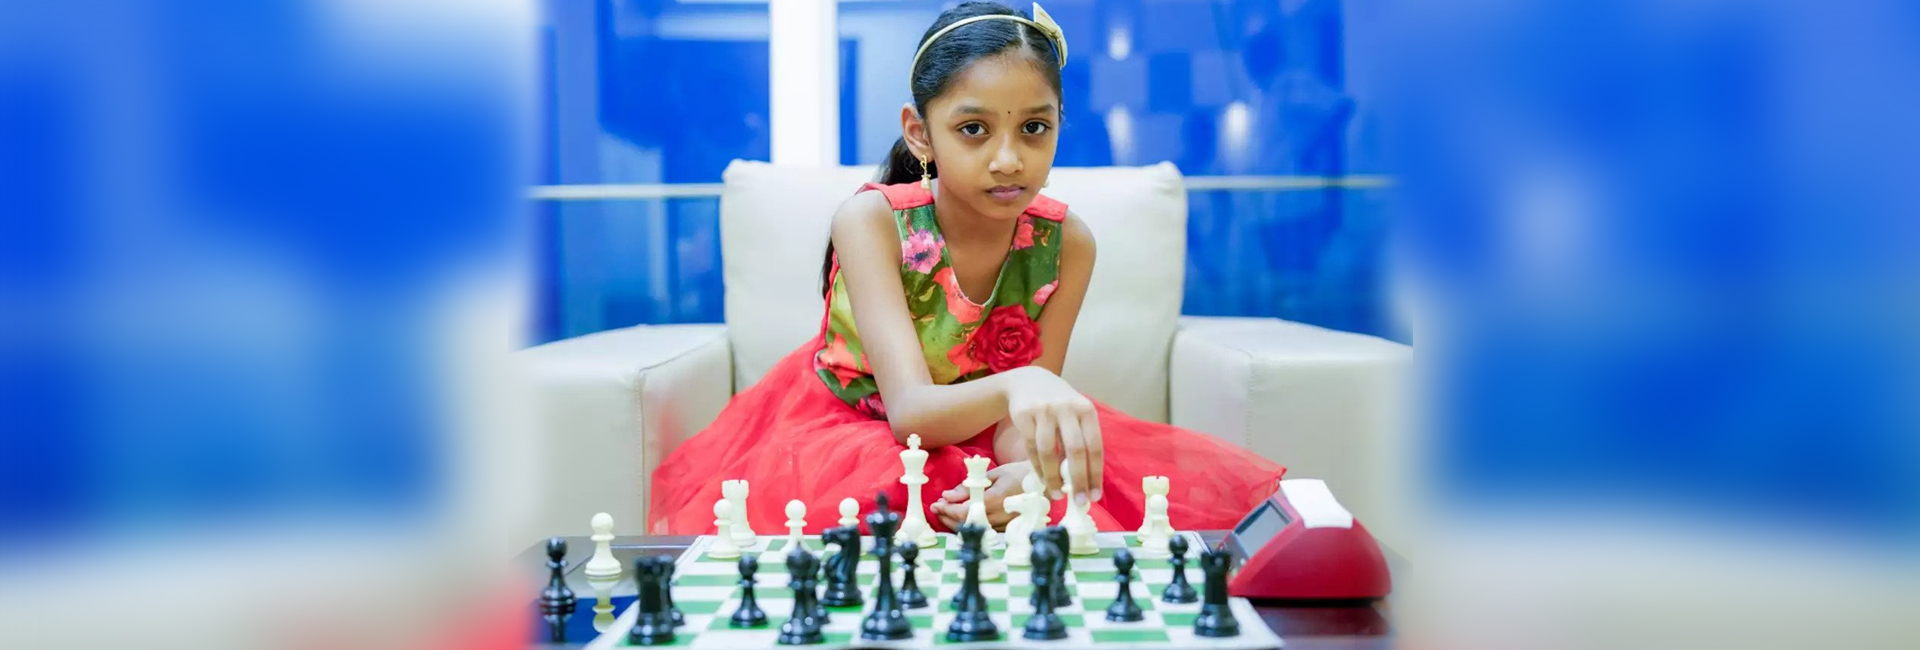 Chess prodigy Alana Meenakshi’s moves are to watch out for